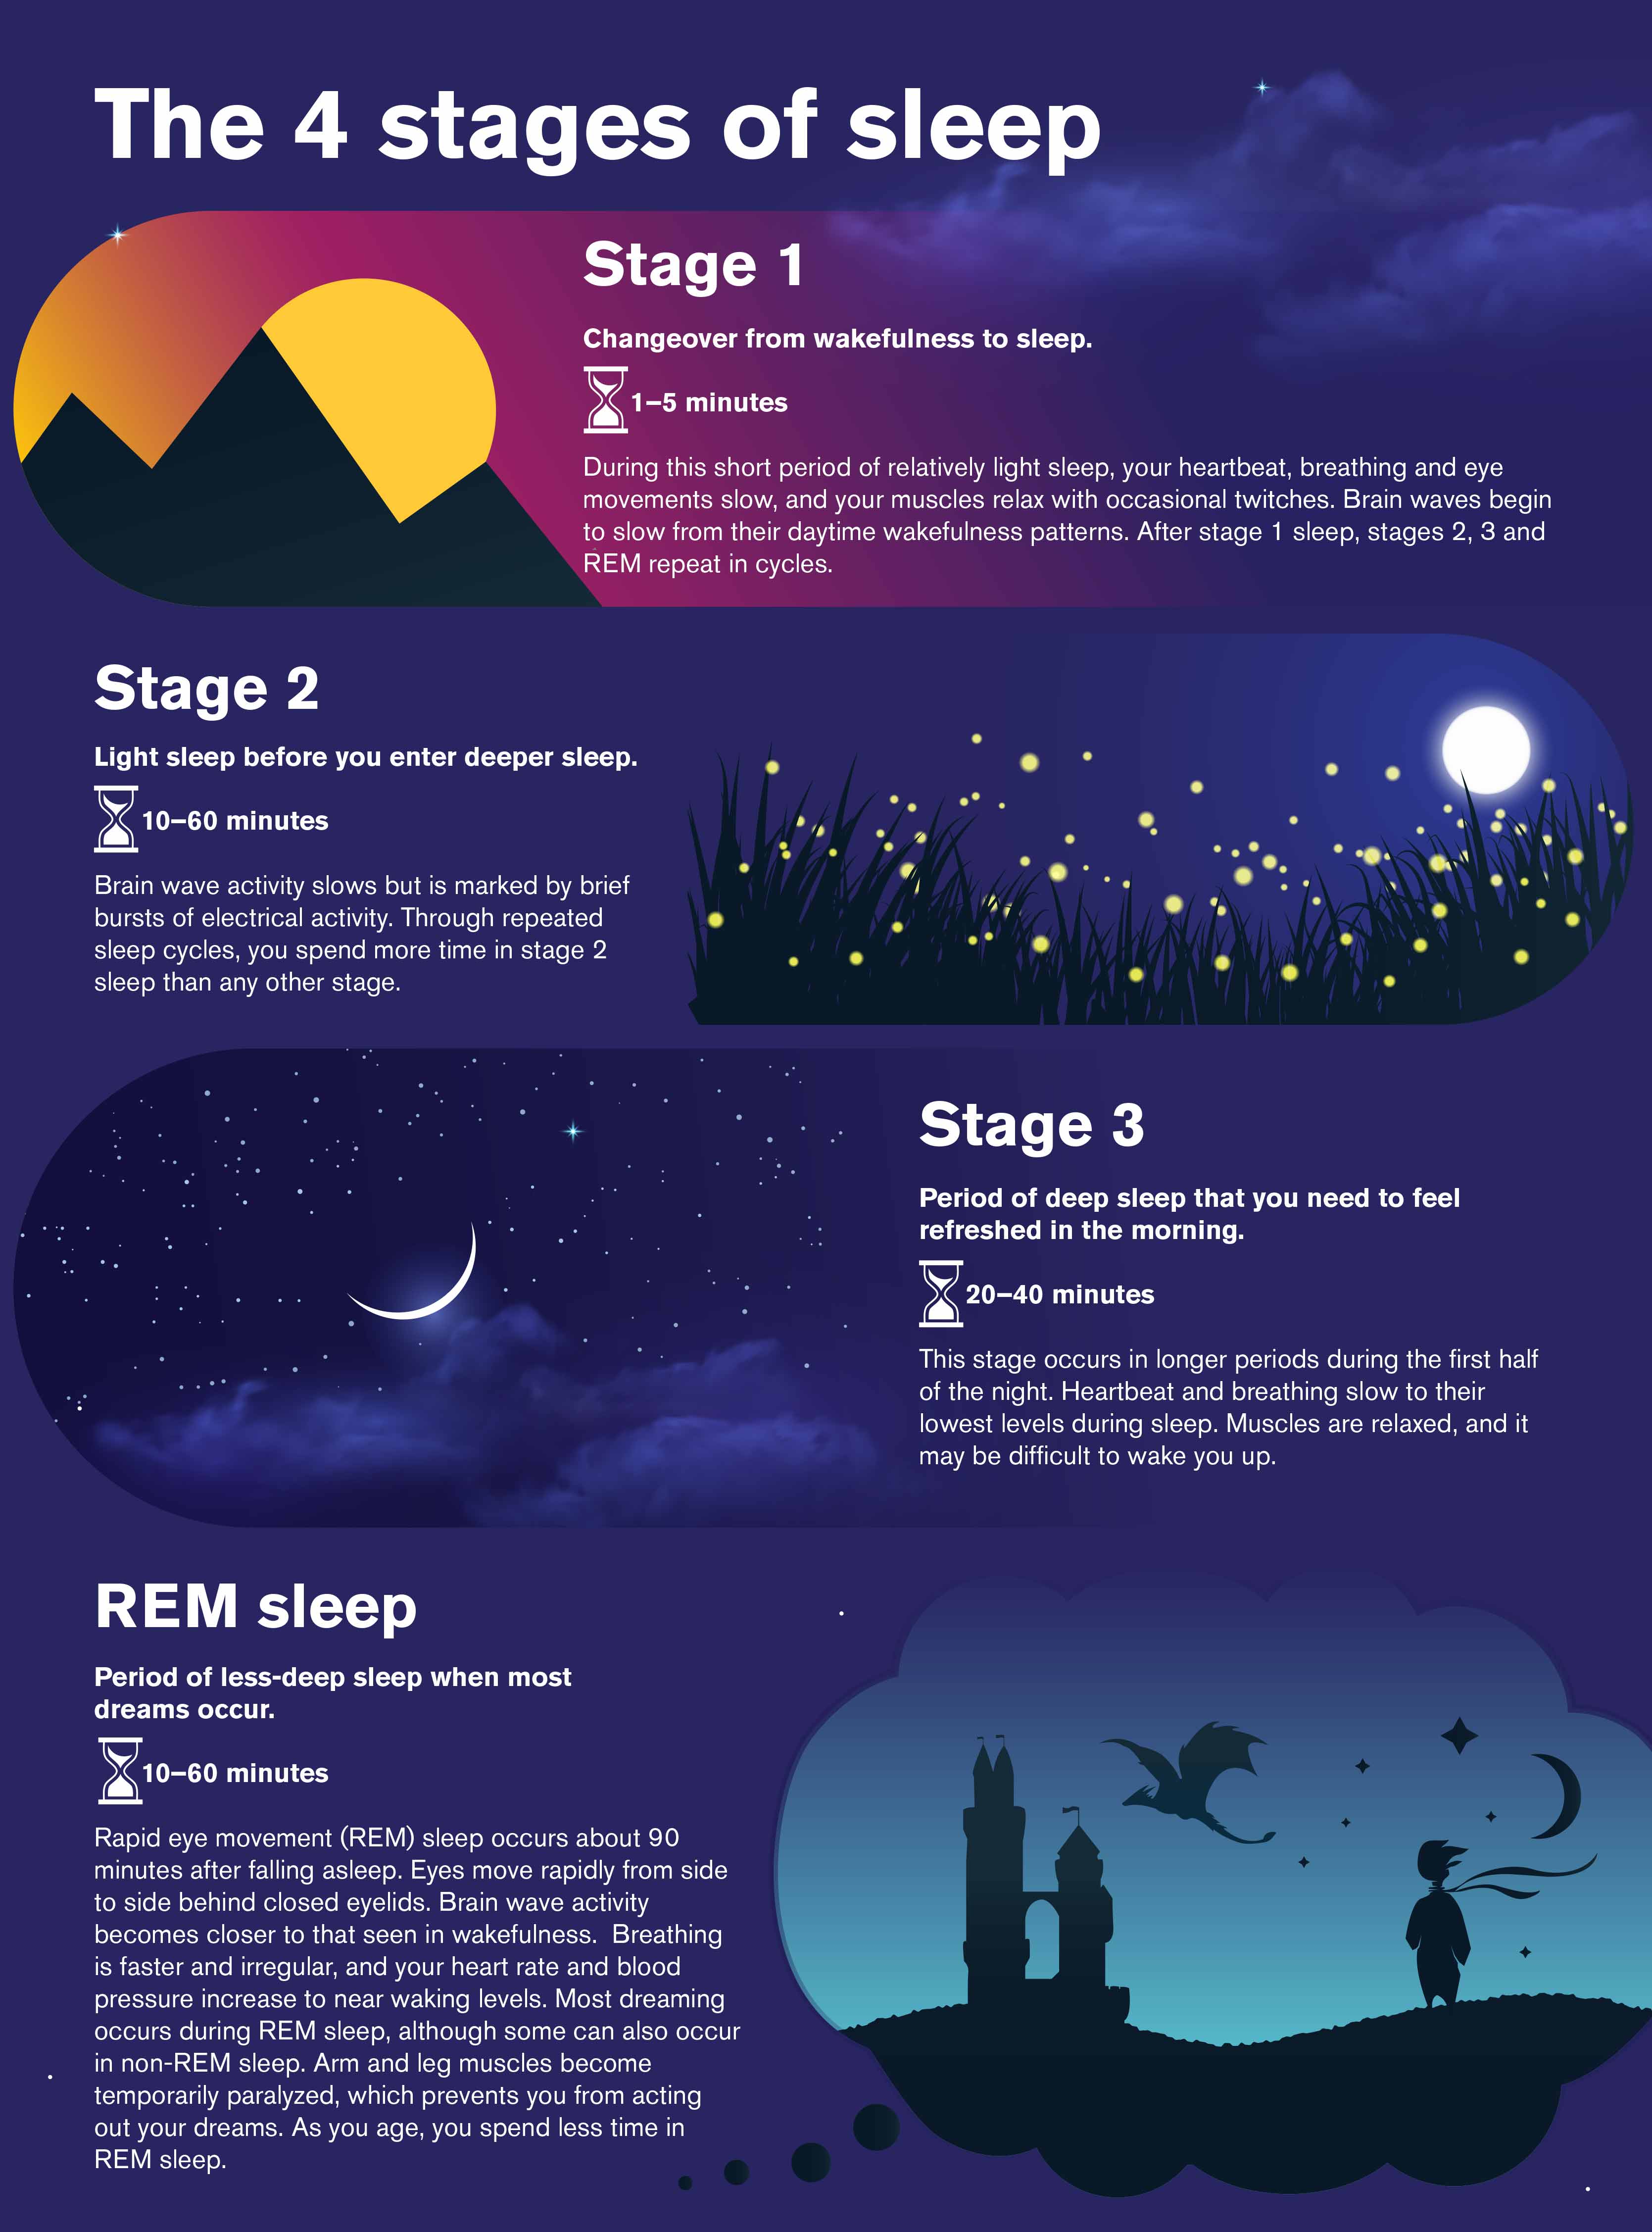 Illustration and text on 4 stages of sleep. Stage 1, changeover from wakefulness to sleep. Stage 2, light sleep before you enter deeper sleep. Stage 3, period of deep sleep that you need to feel rested. REM sleep, period of less-deep when you dream. sle